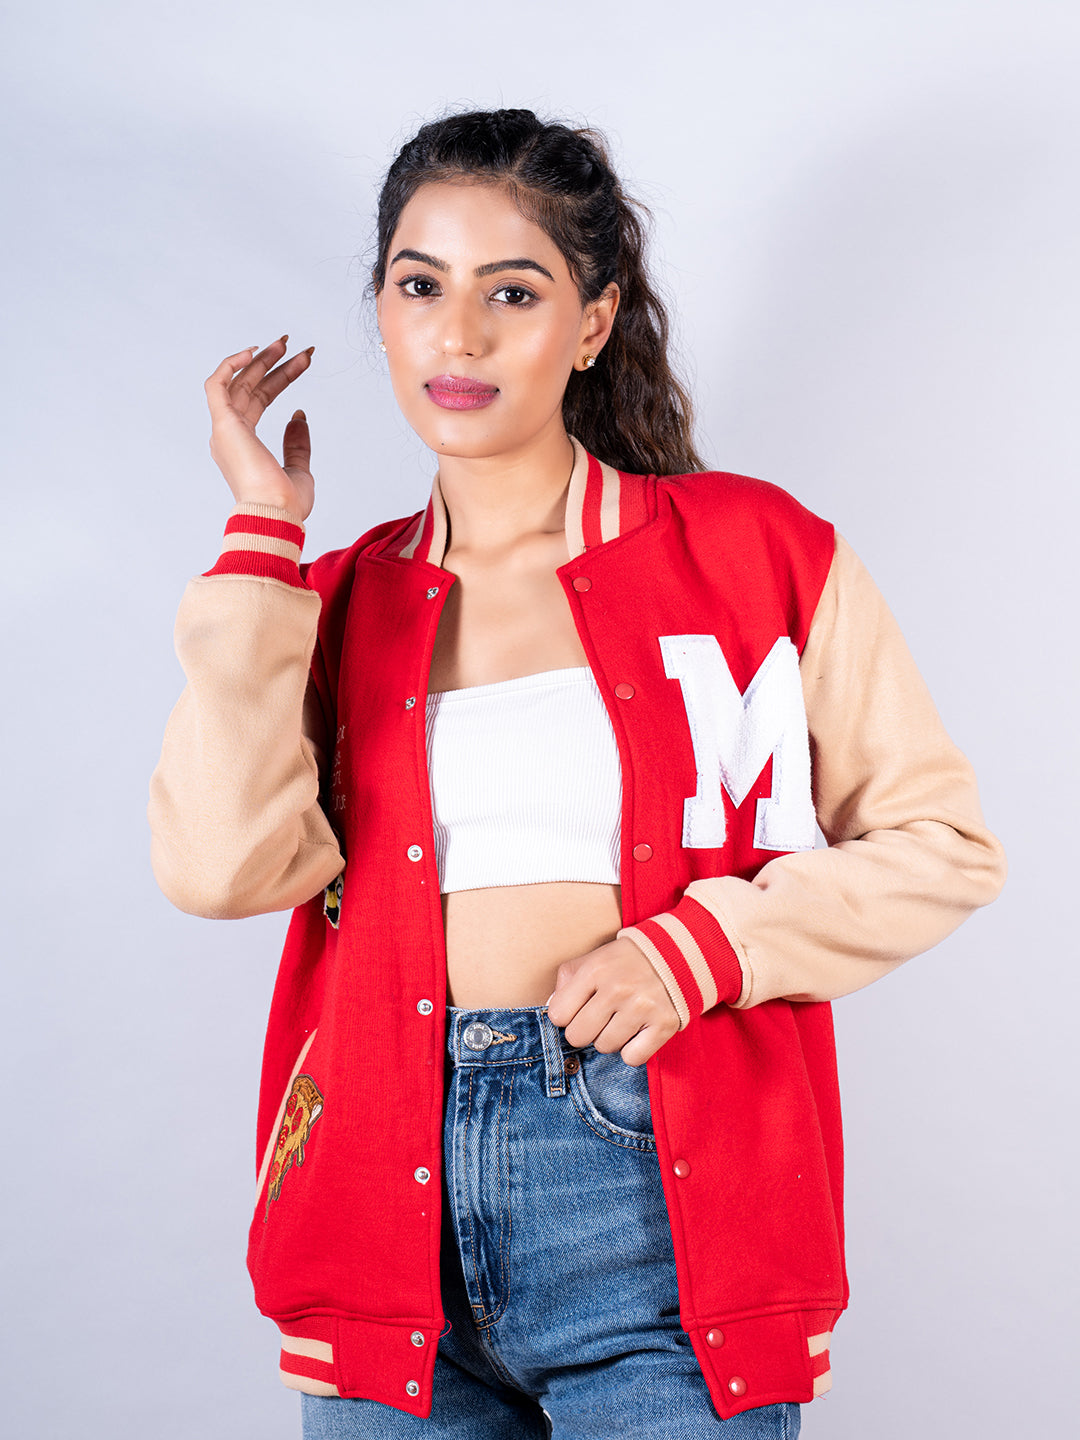 Women's Varsity Jacket for Baseball Letterman Bomber Full Red Wool and  Genuine White Leather Straps (XXS, Red) at Amazon Women's Coats Shop